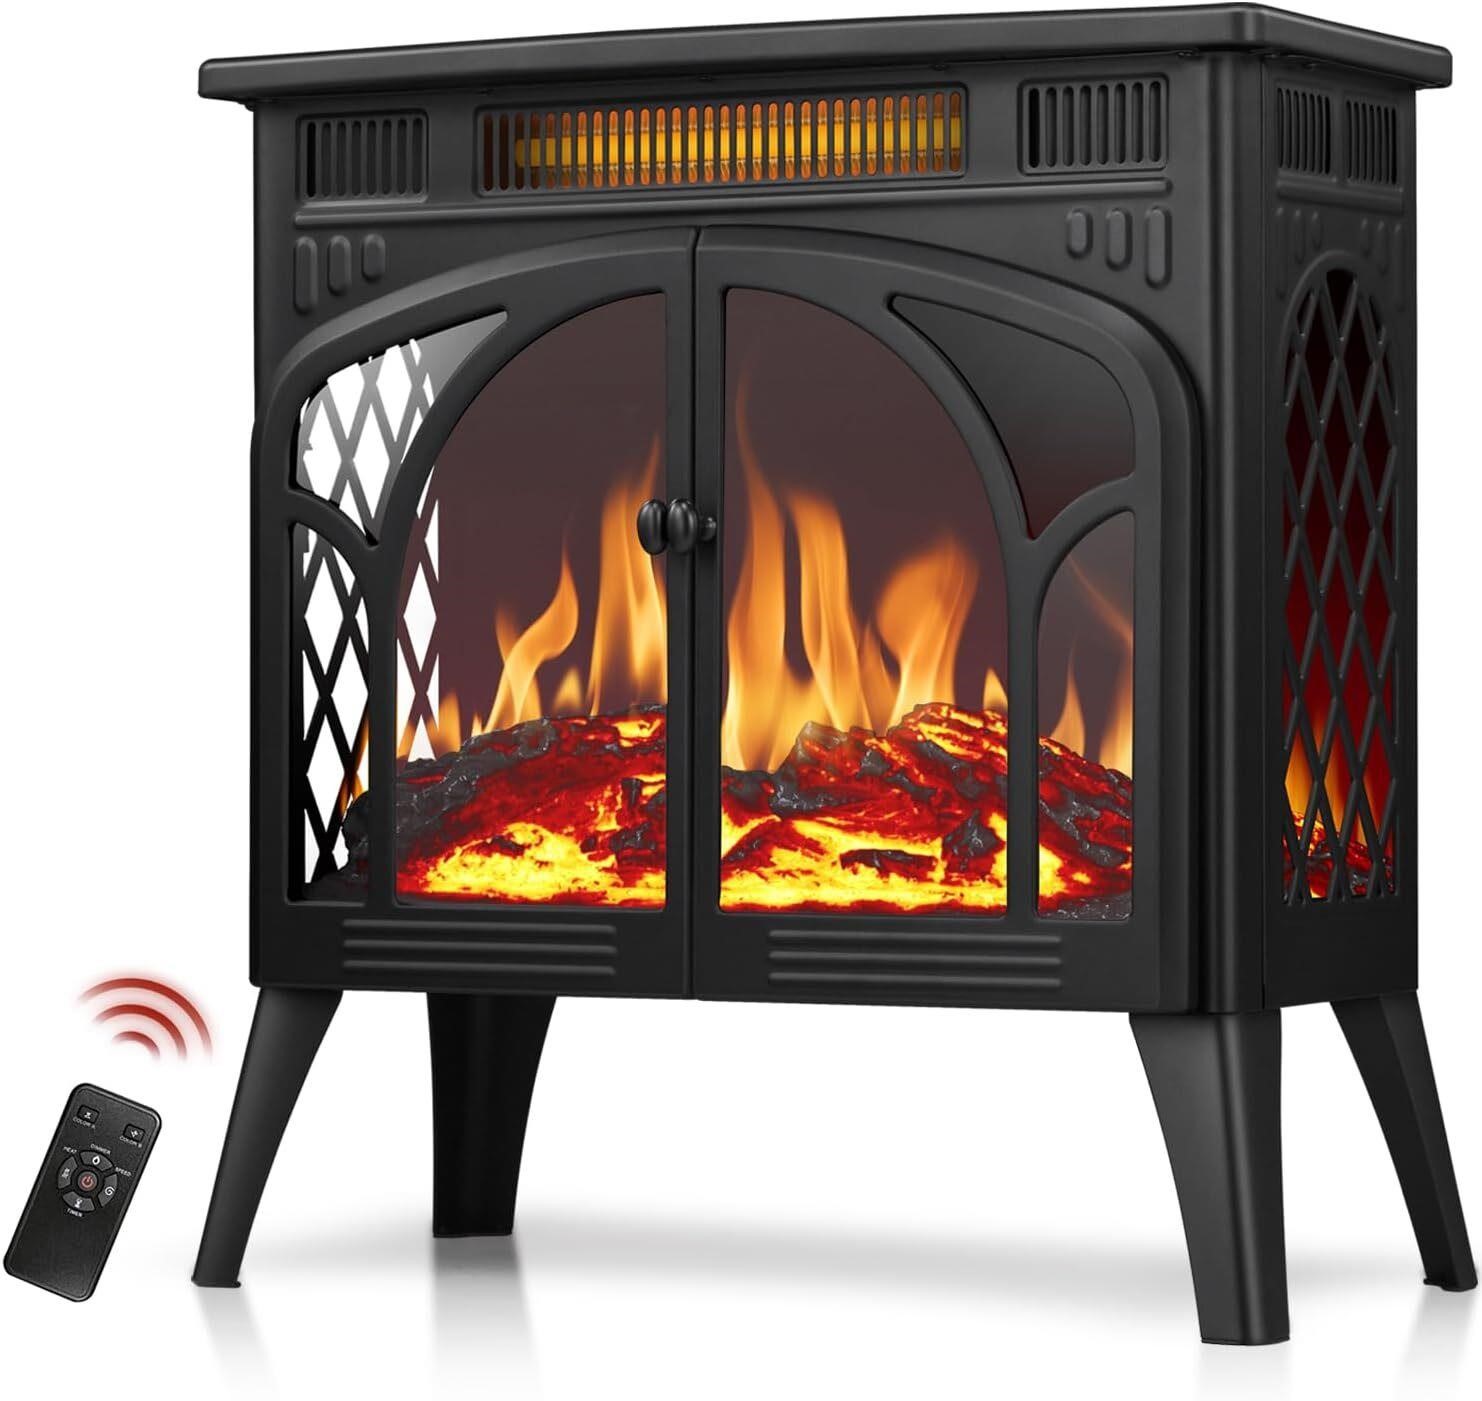 R.W.FLAME Electric Fireplace Heater 25 with Remote